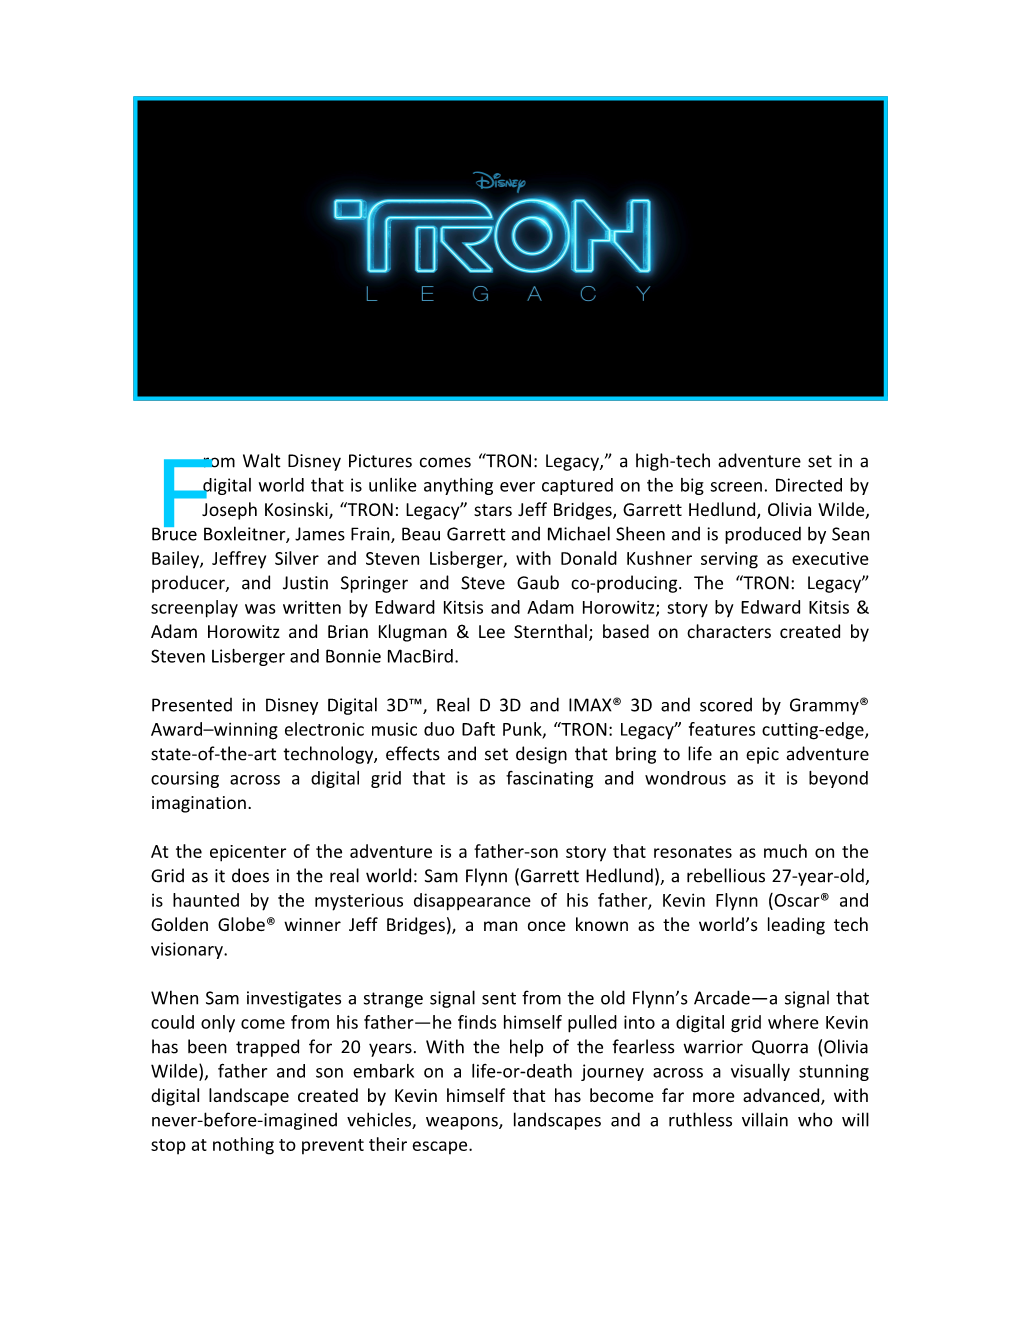 Rom Walt Disney Pictures Comes TRON: Legacy, a High-Tech Adventure Set in a Digital World